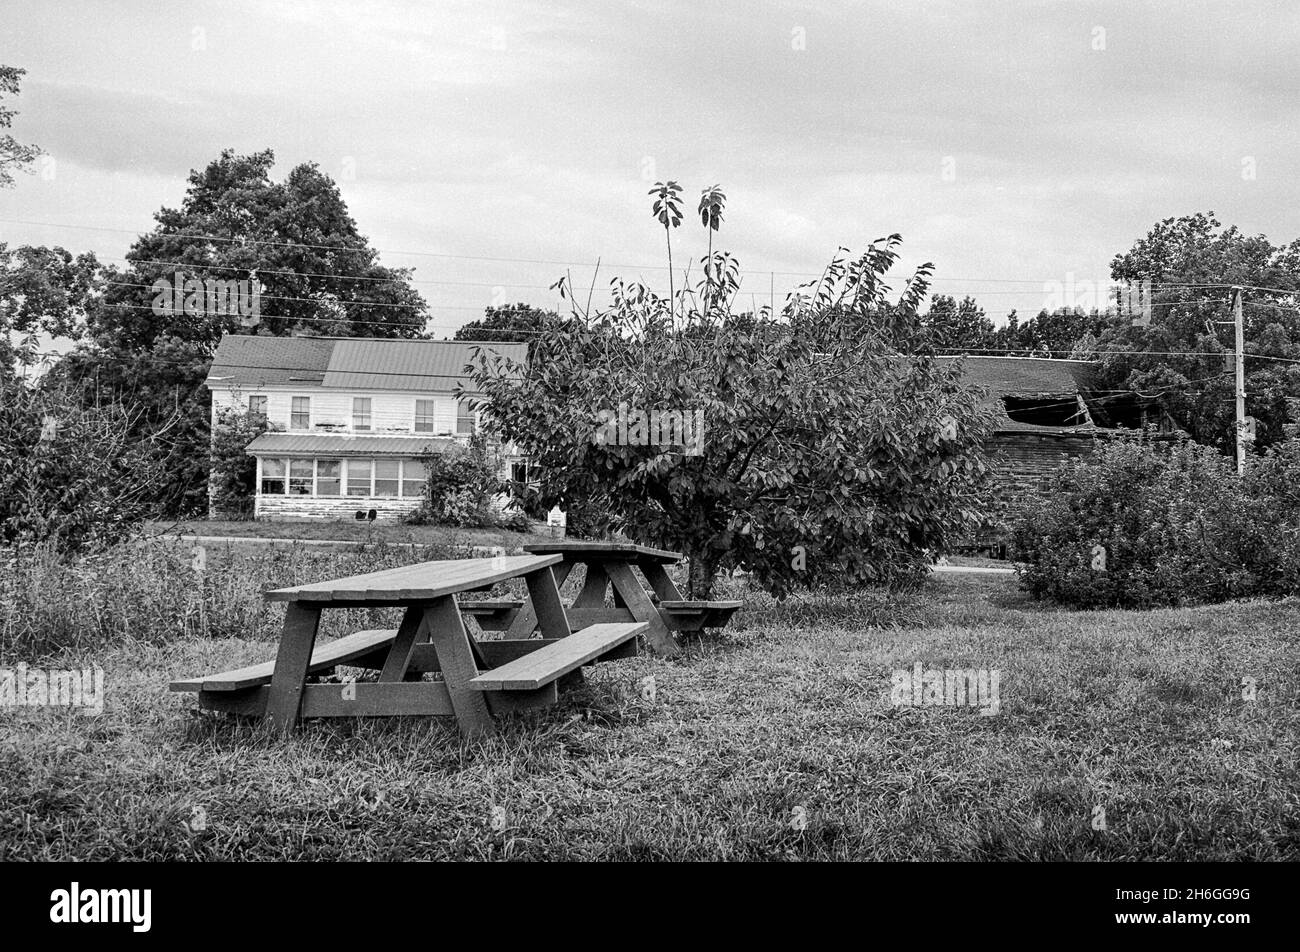 Picnic tables accross from ababonded home and barn Elwood Orchards - Londonderry, NH - Captured on Ilford XP2 black and white film. Stock Photo